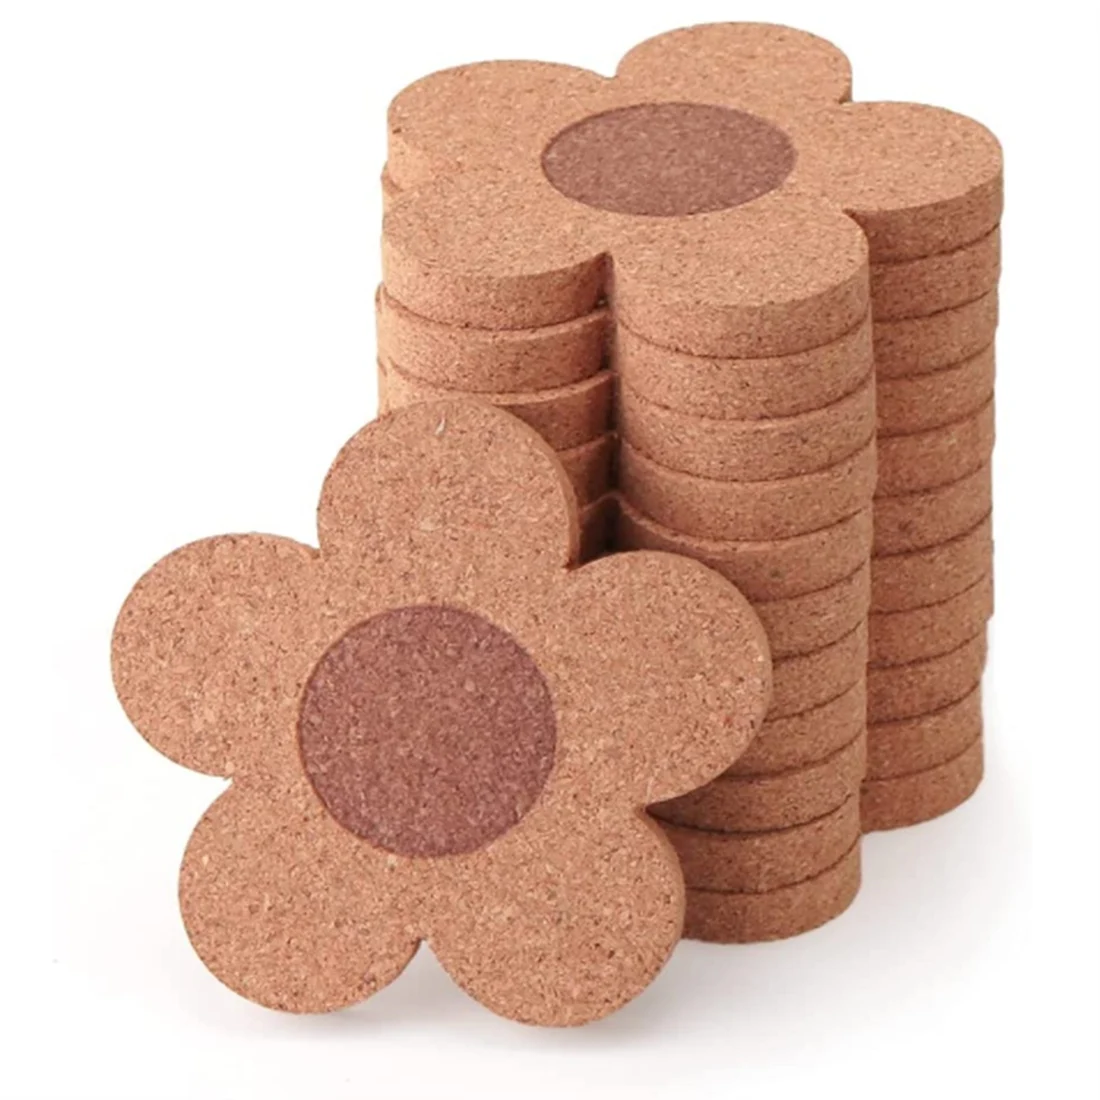 

12PCS Cute Coasters for Drinks Absorbent&Reusable Coaster Set 4Inch Cork Flower Shape Coasters for Coffee Tea Cup Mat